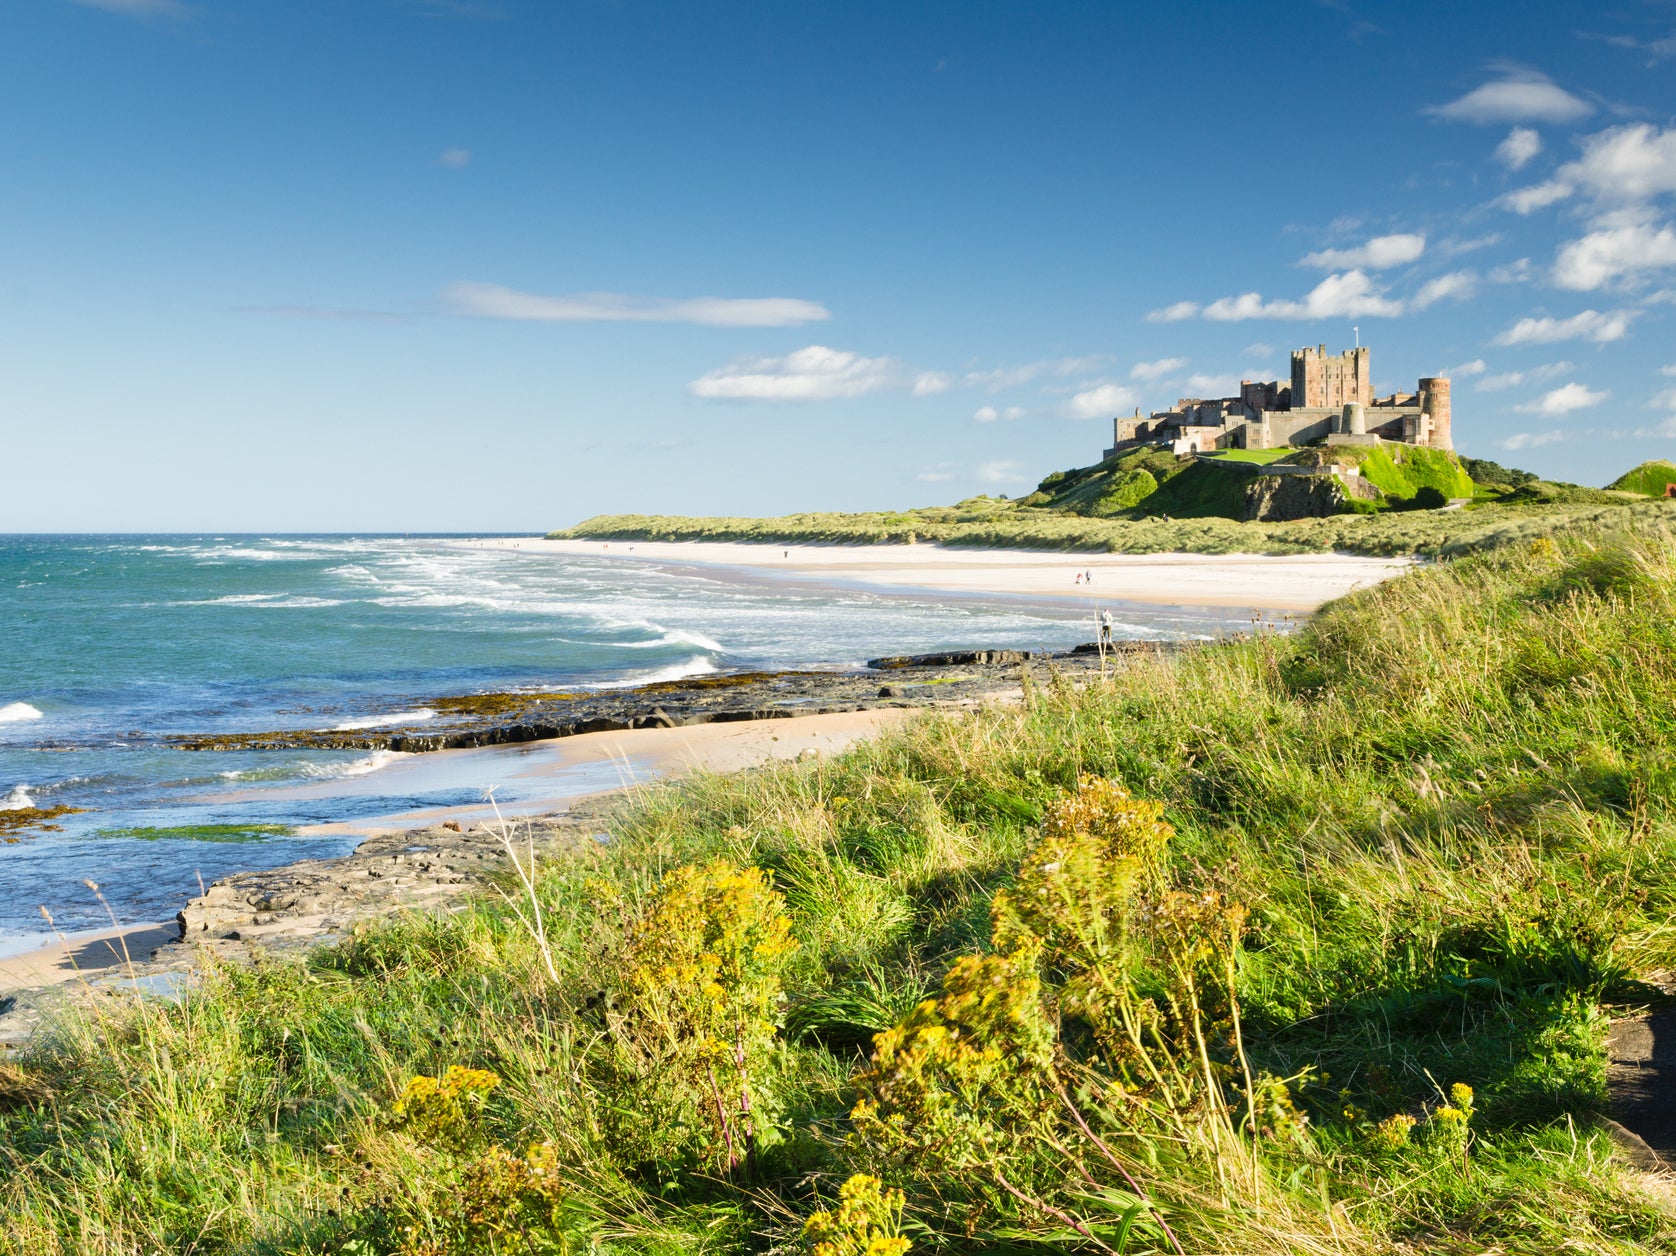 Bamburgh managed to hold off competition from some of the bigger seaside destintions